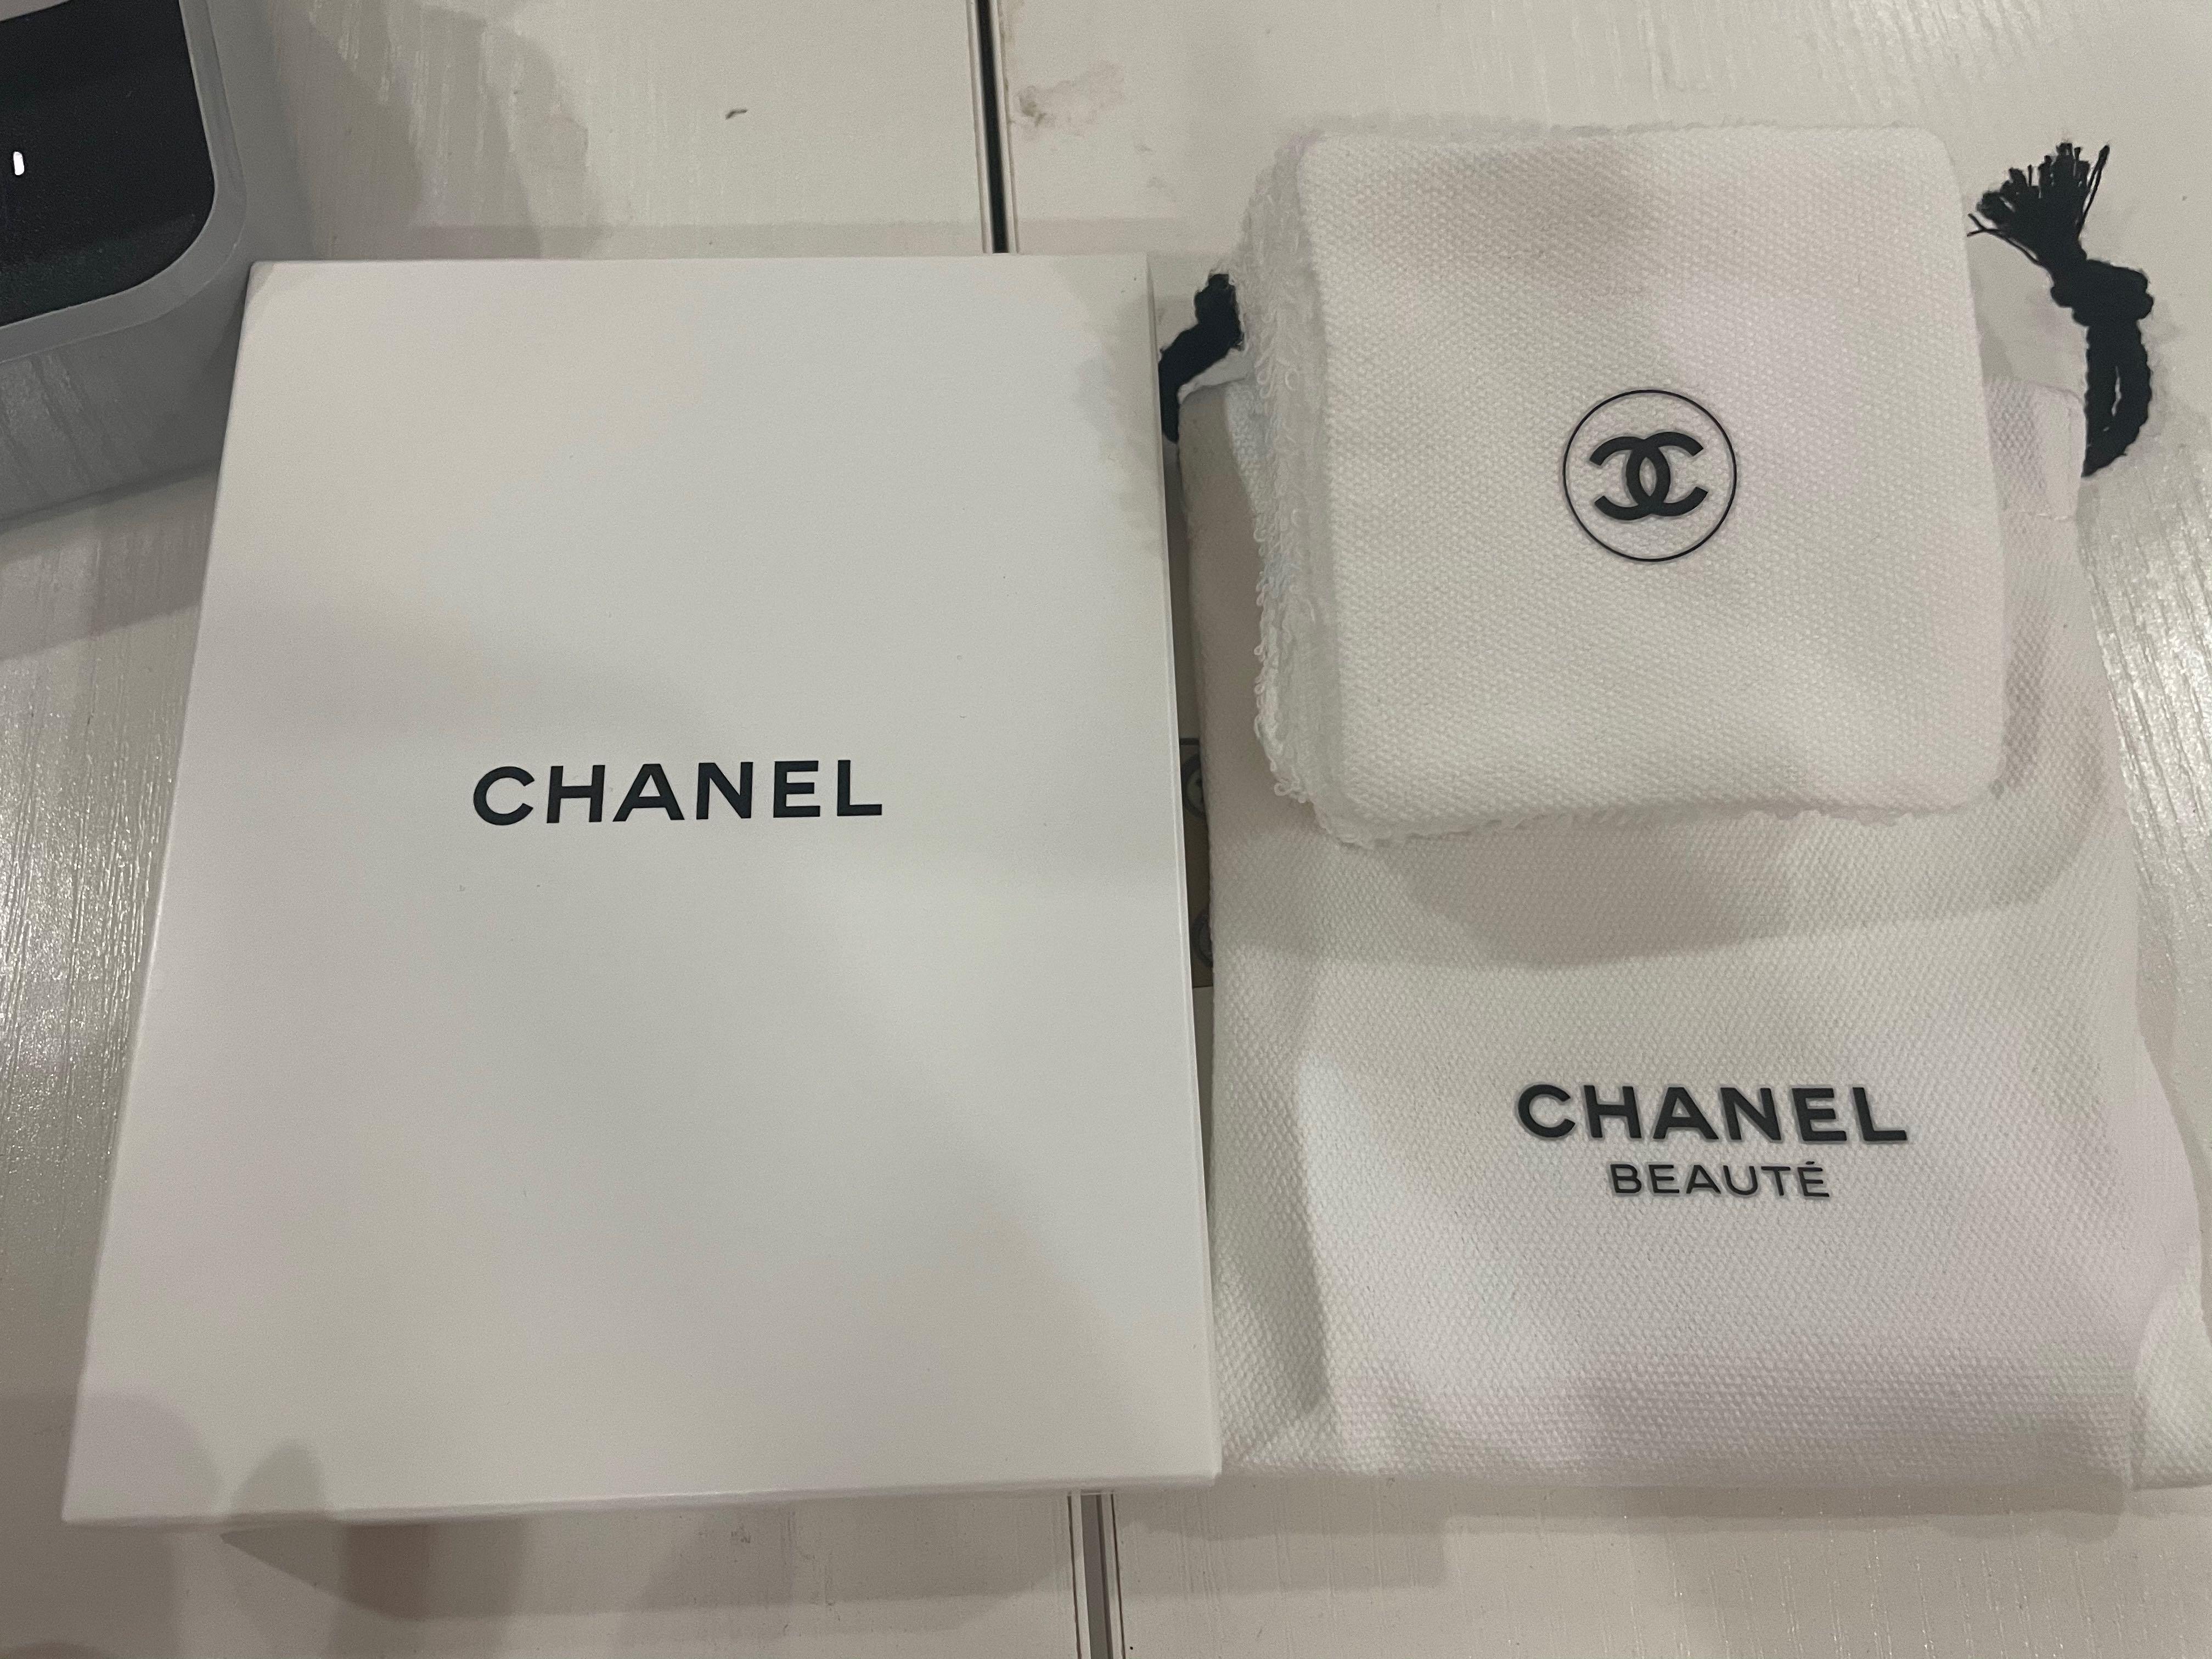 So, Would You Pay $20 For Cotton Face Pads Made by Chanel?